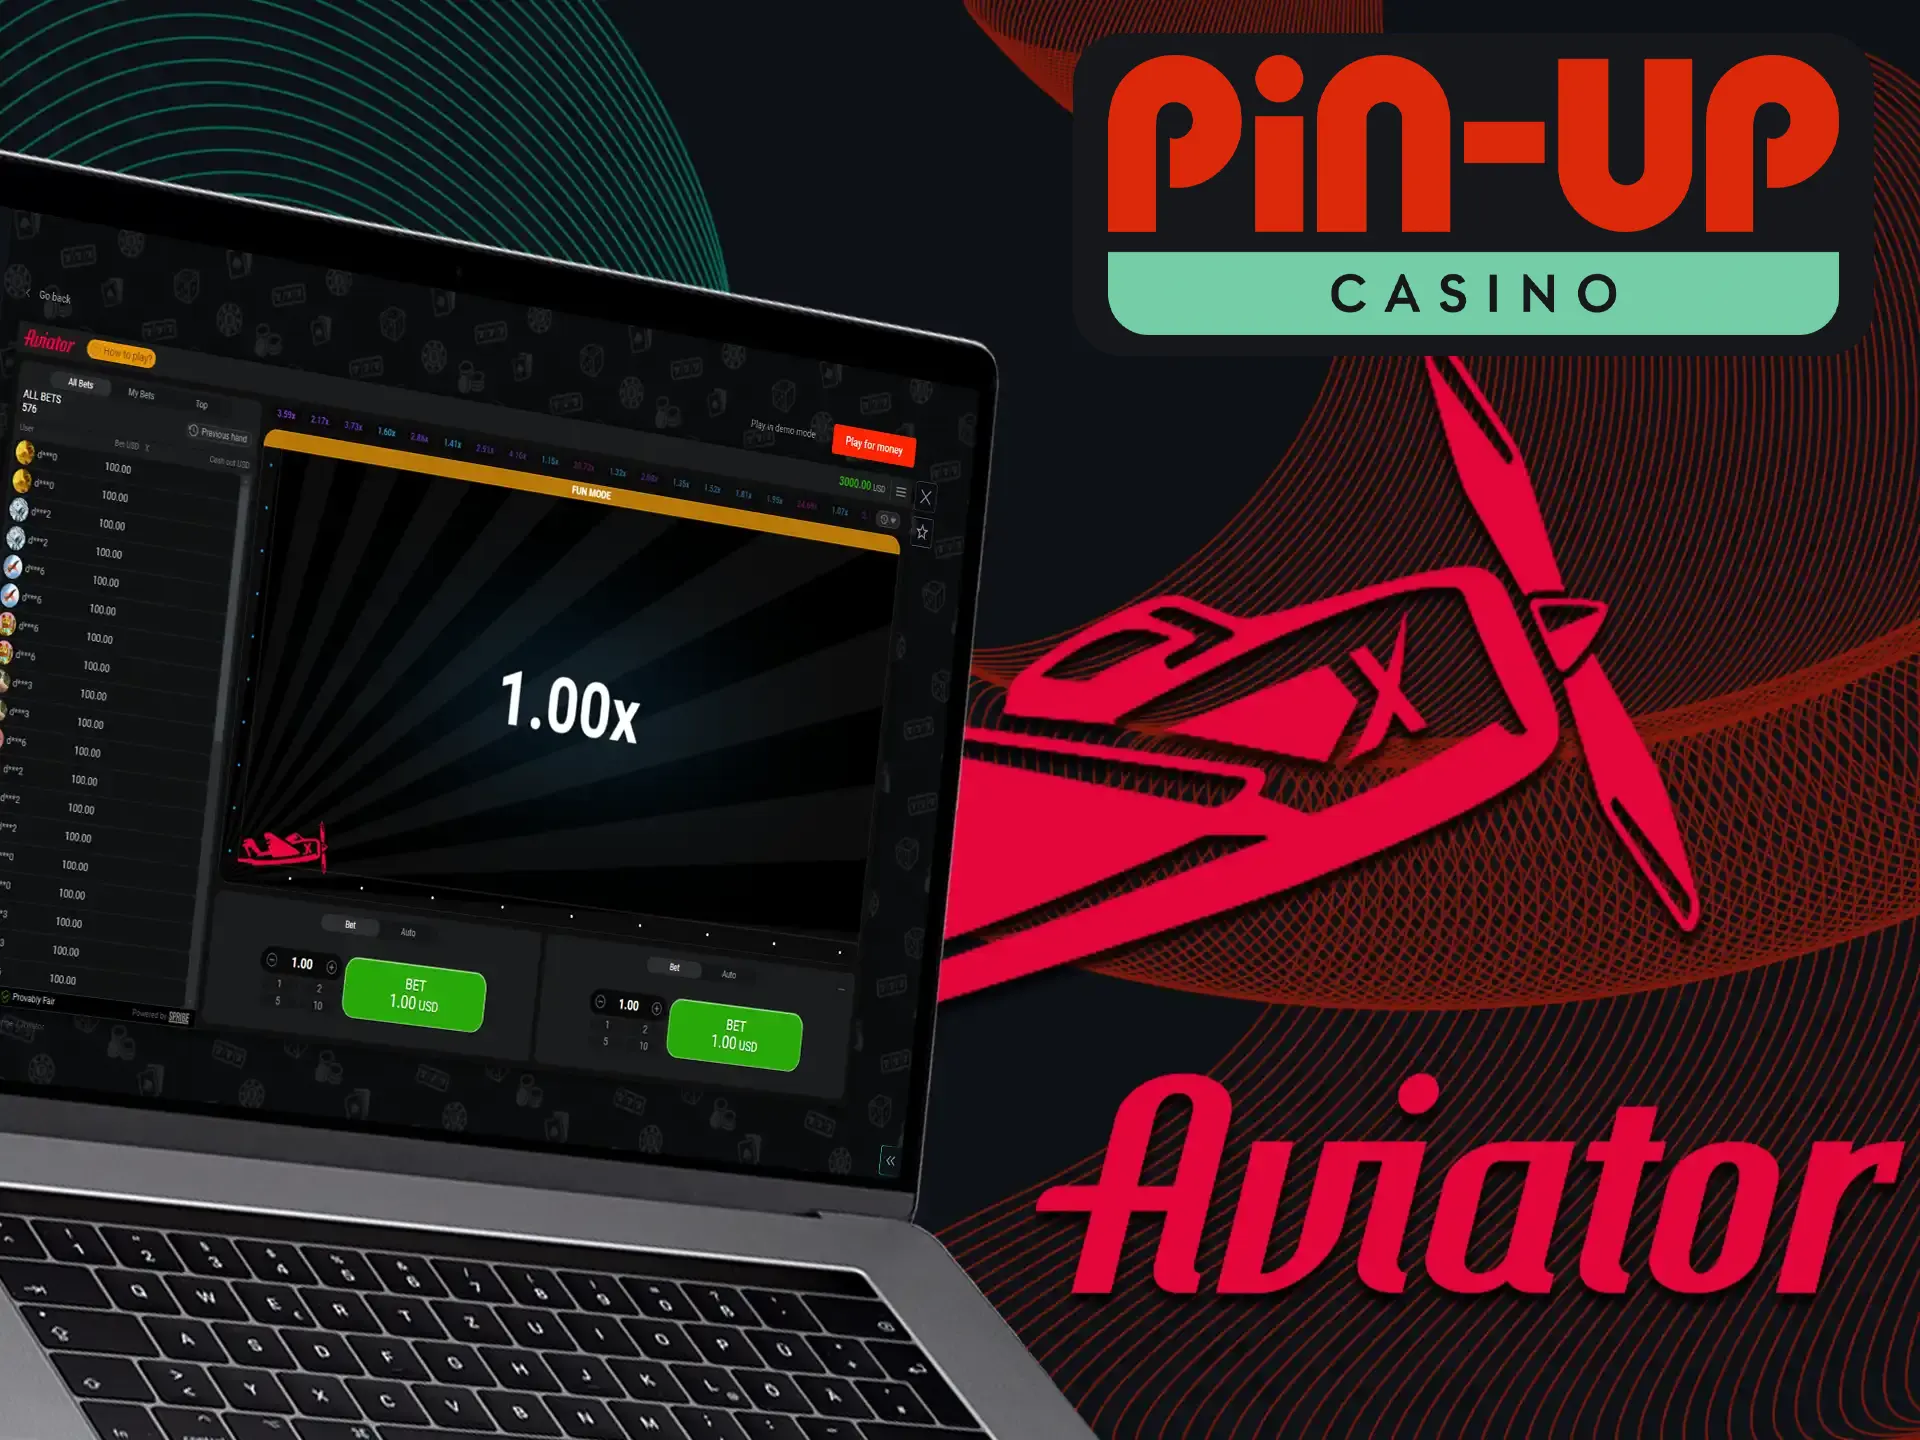 Try the demo version of the Aviator game at Pin-Up Casino!